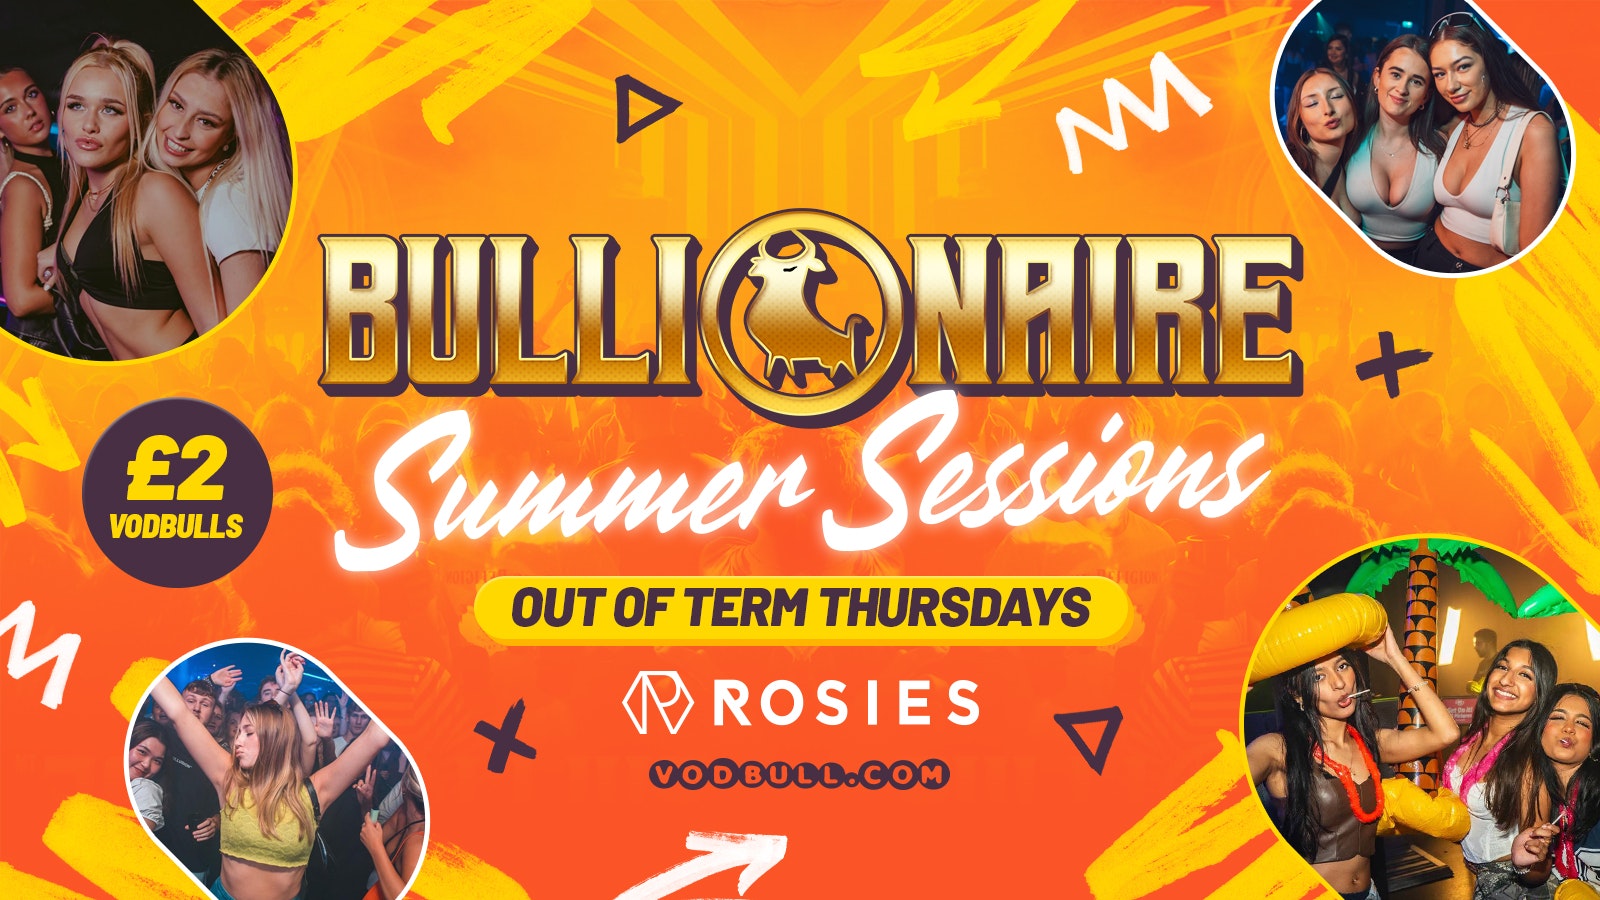 🧡 Bullionaire™️ [TONIGHT]☀️ Summer Sessions!☀️ Thursdays at Rosies by Vodbull ⭐️11/07